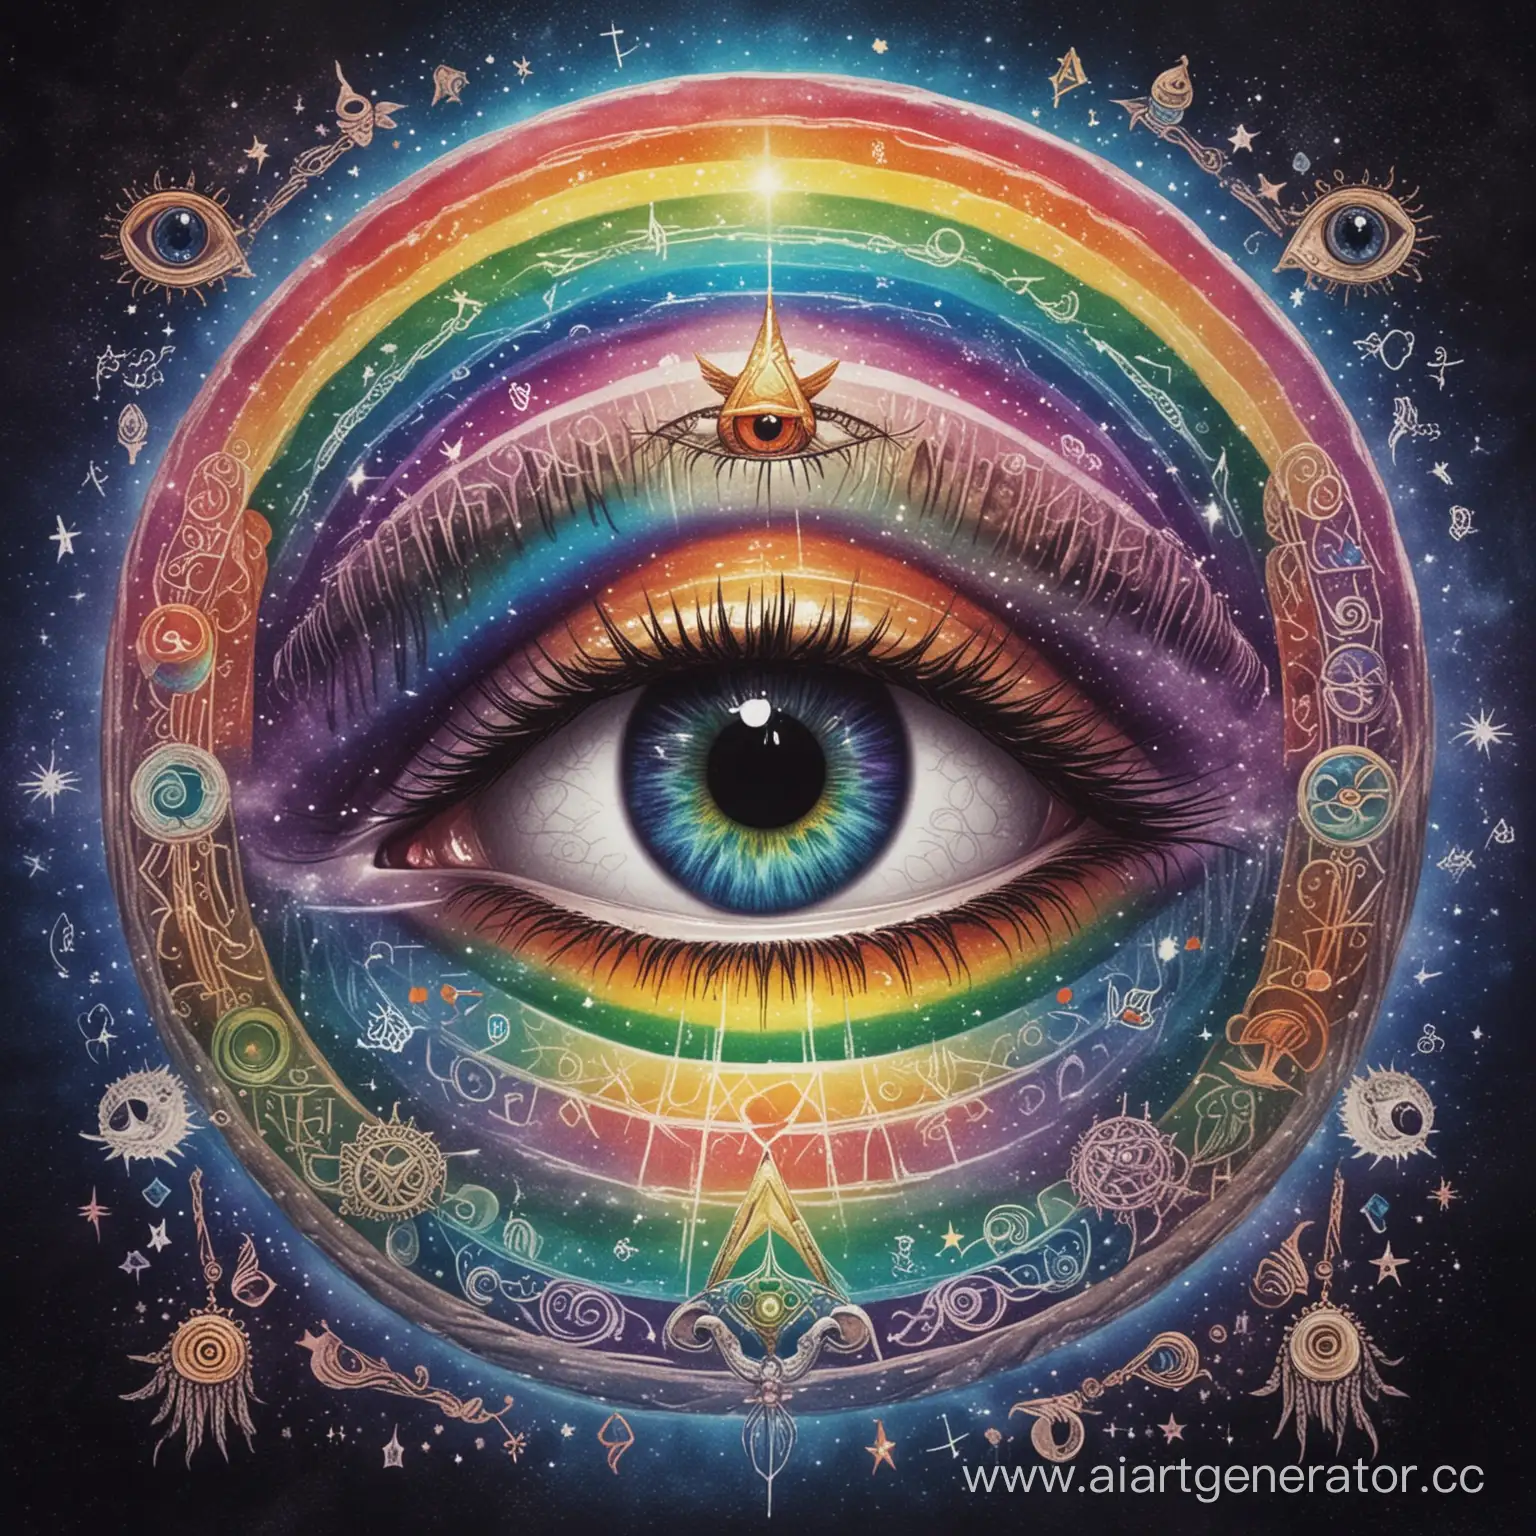 Mystical-Rainbow-Eye-Poster-with-Symbolic-Imagery